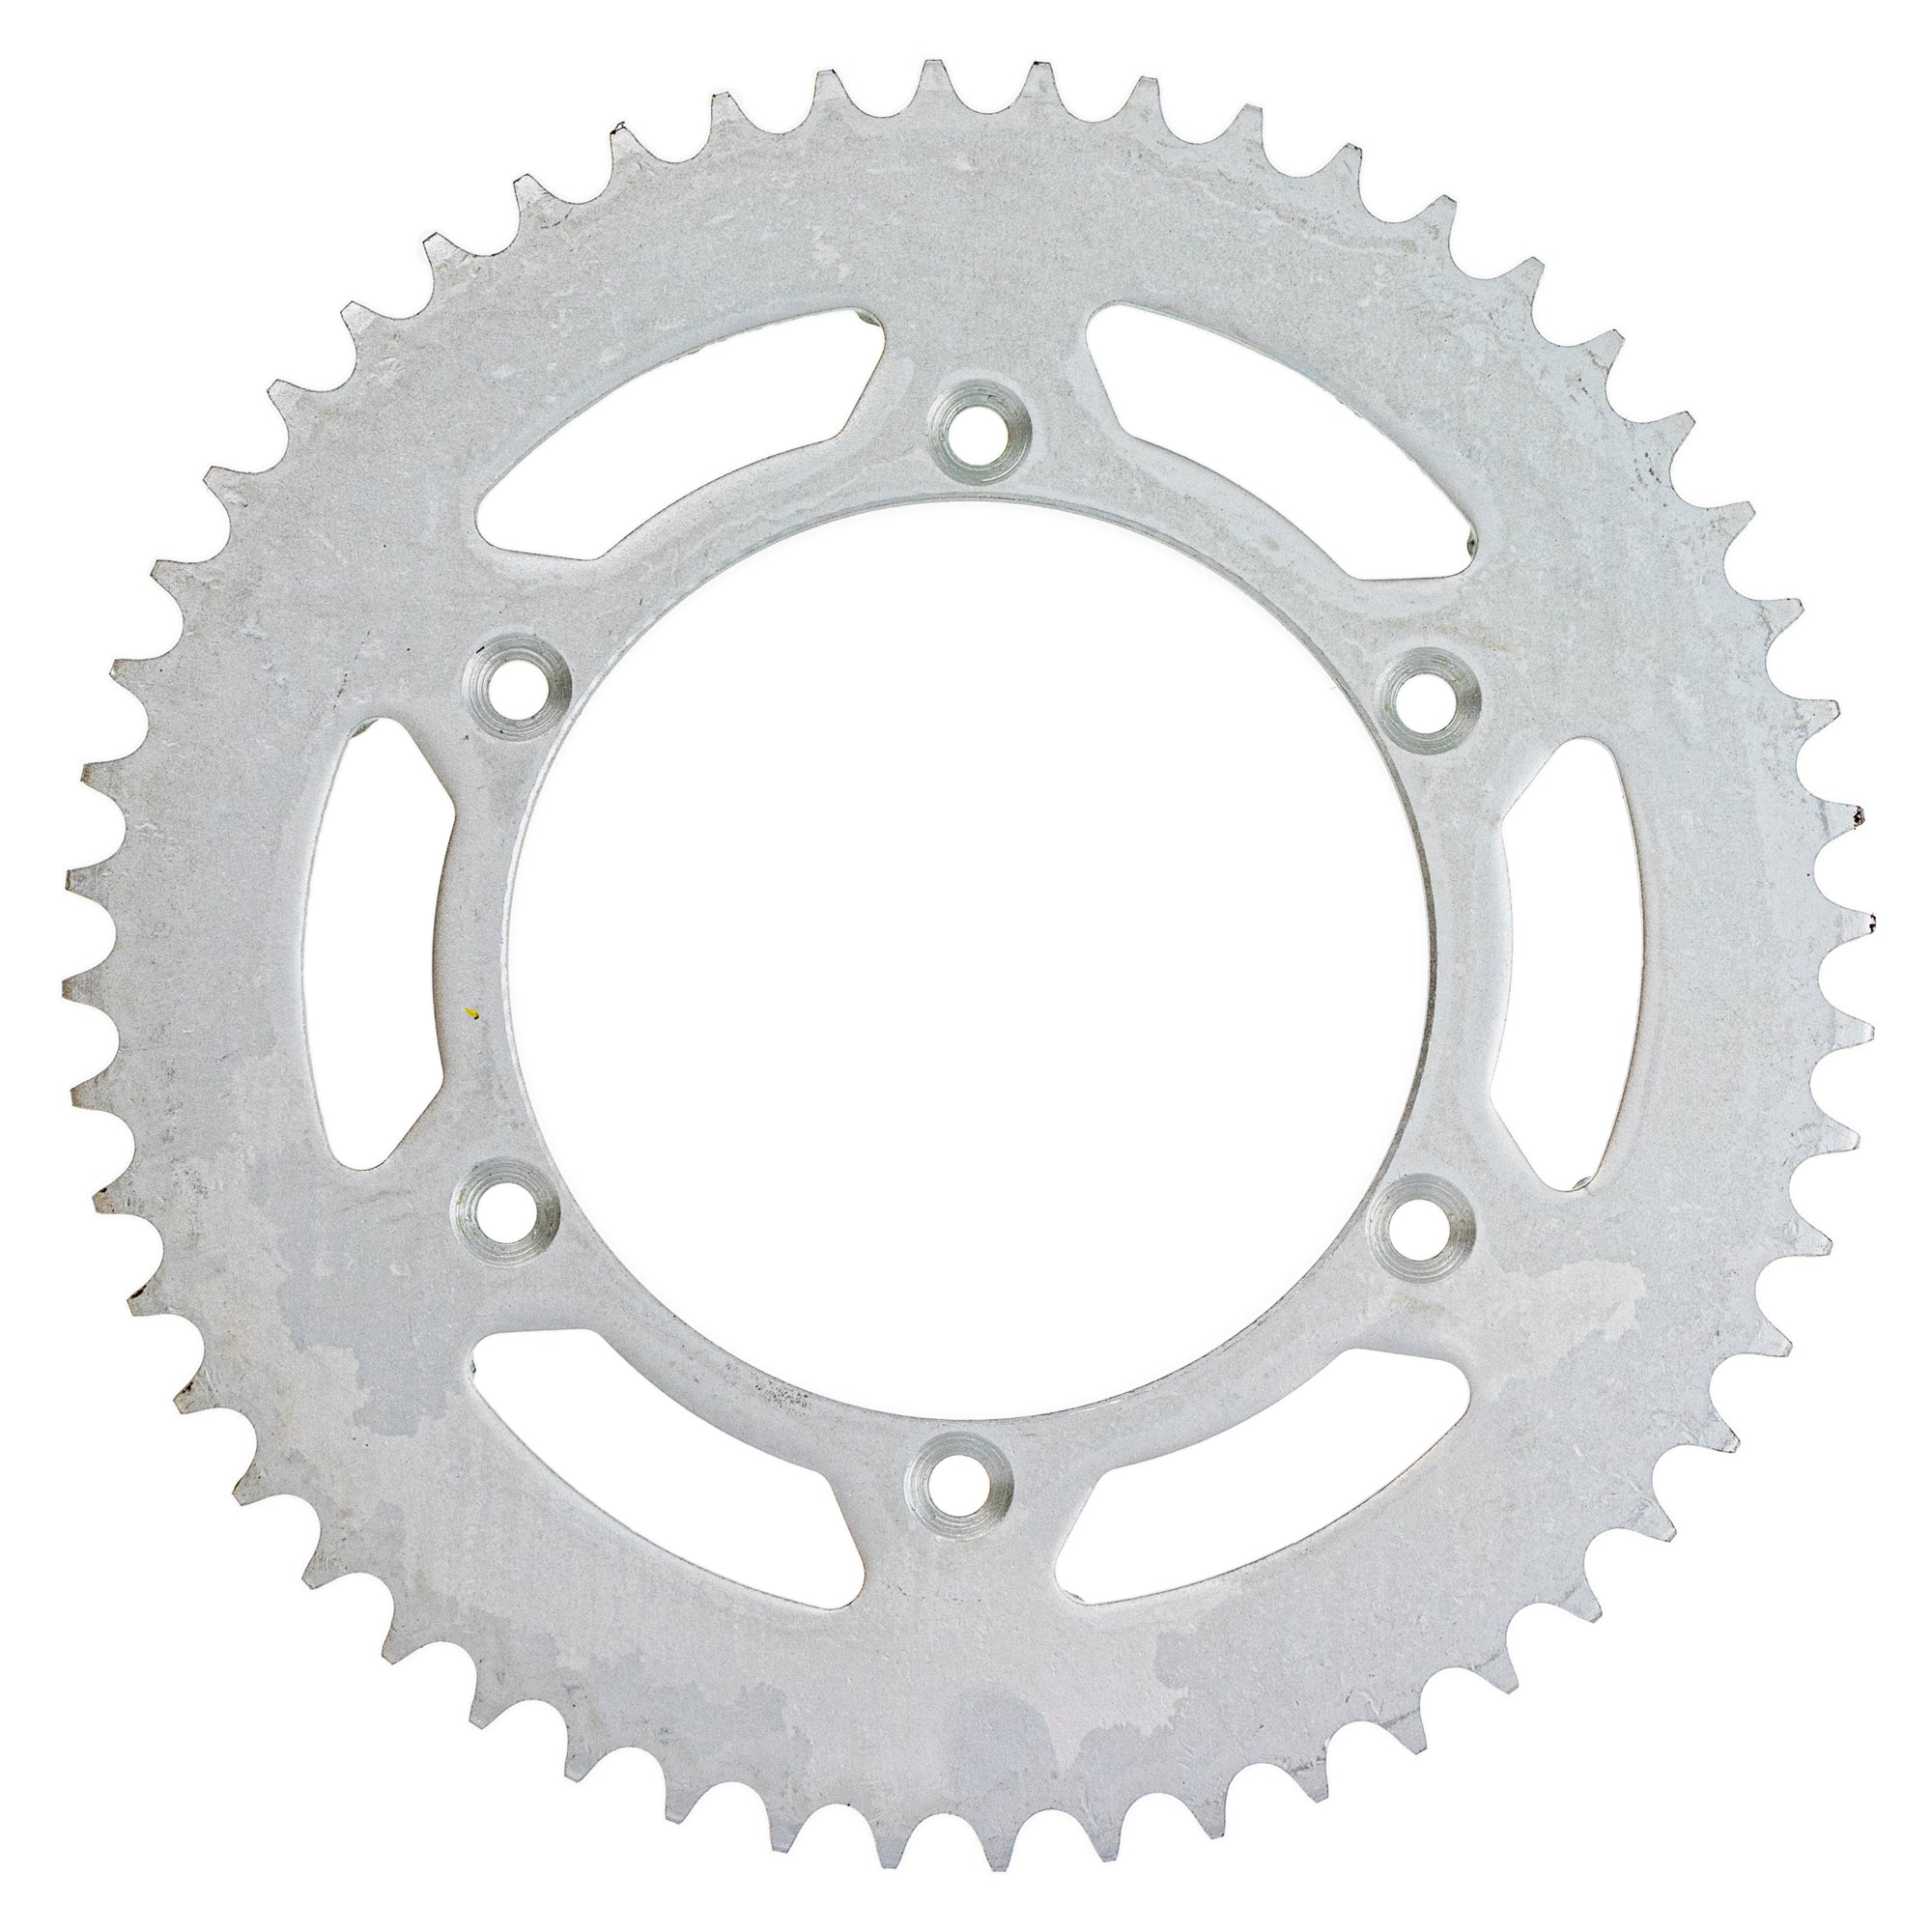 Drive Sprockets & Chain Kit For BETA MK1004129